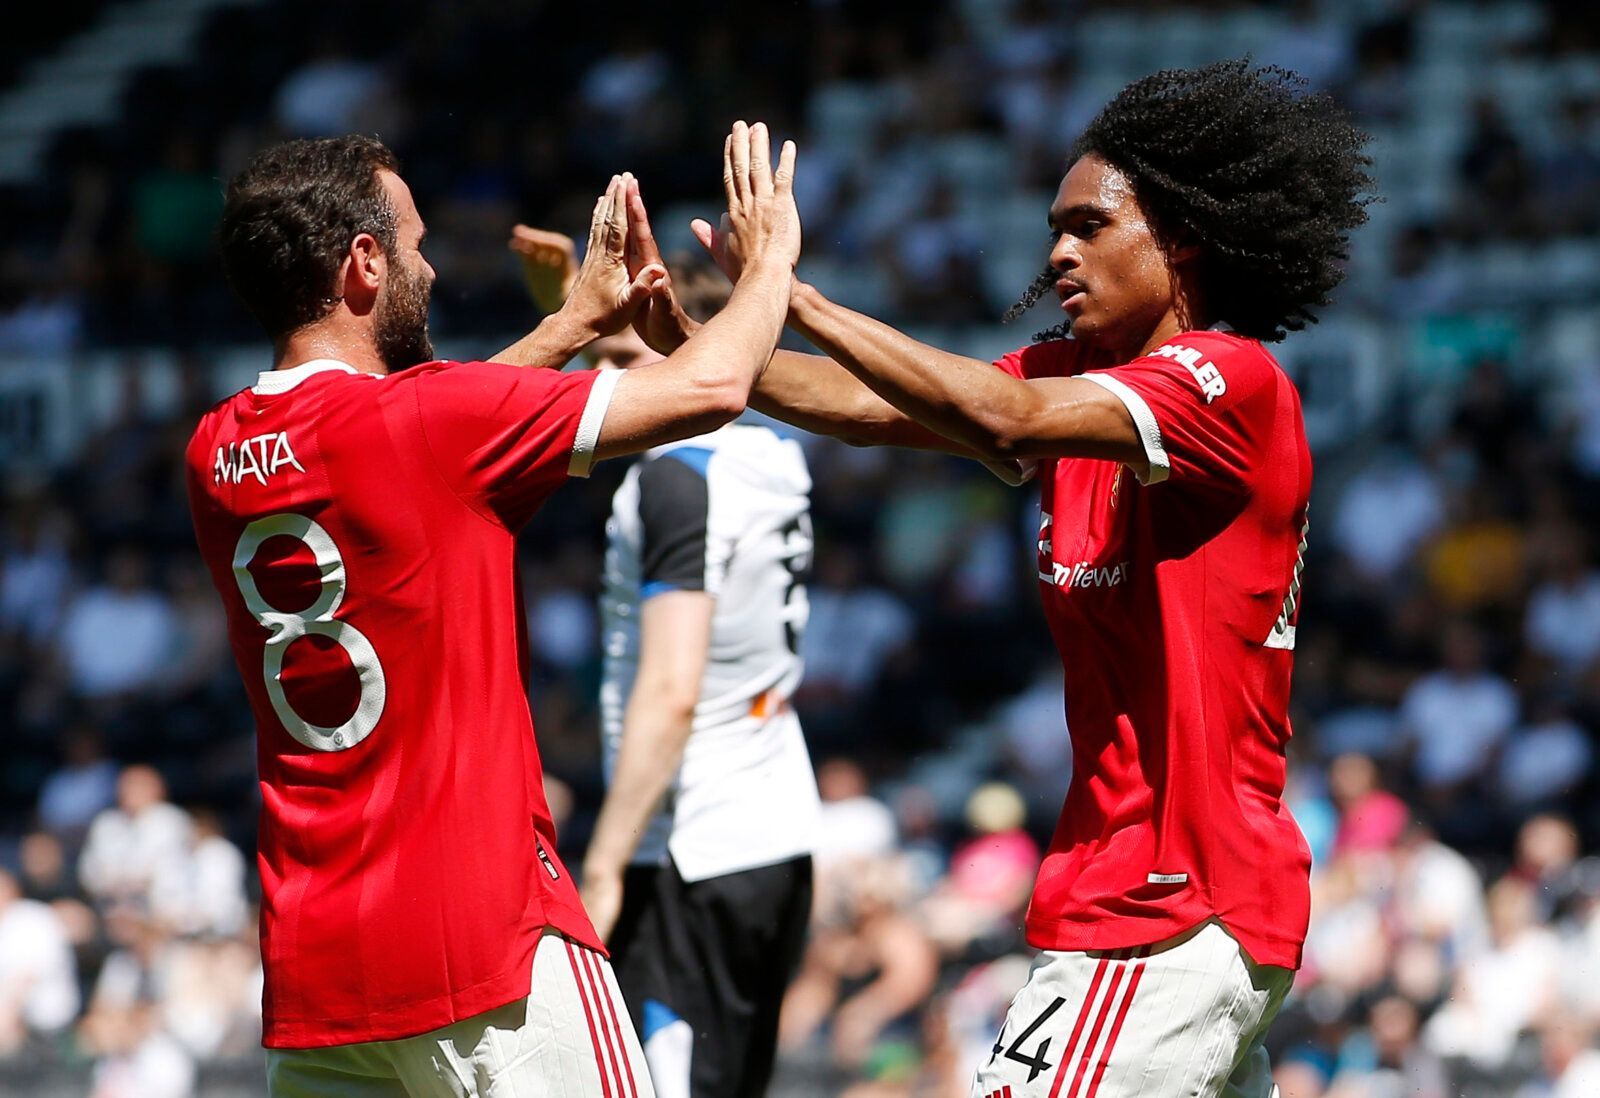 Soccer Football - Pre Season Friendly - Derby County v Manchester United - Pride Park, Derby, Britain - July 18, 2021 Manchester United's Tahith Chong celebrates scoring their first goal with Juan Mata Action Images via Reuters/Craig Brough